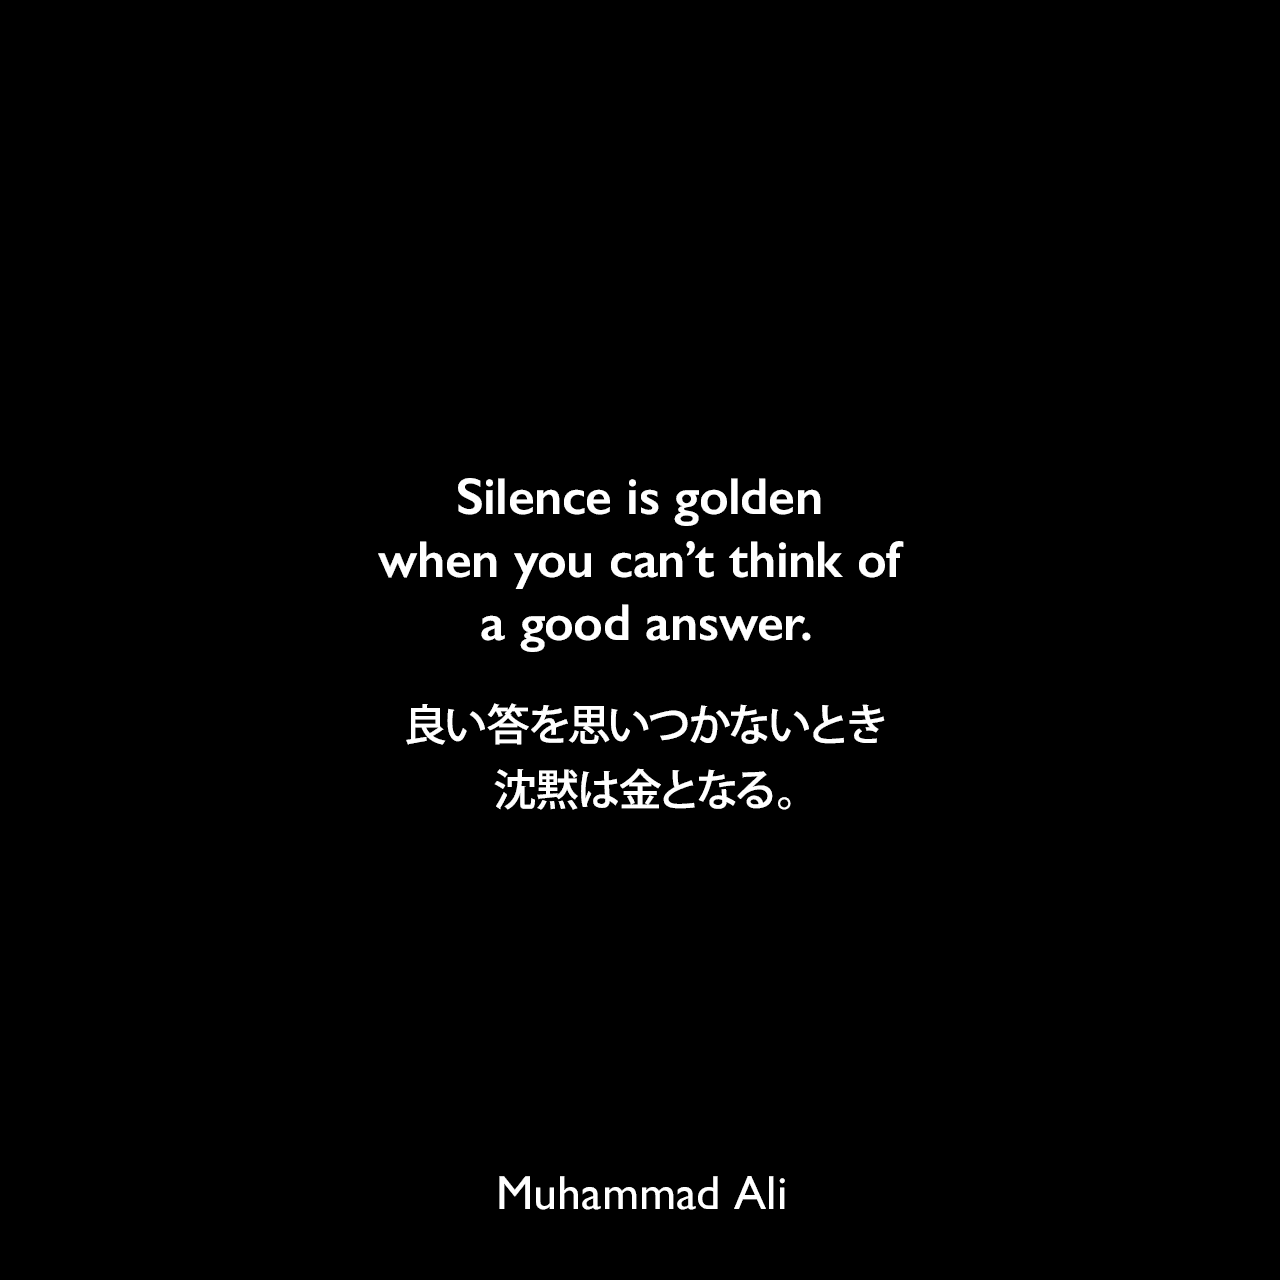 Silence is golden when you can’t think of a good answer.良い答を思いつかないとき、沈黙は金となる。Muhammad Ali